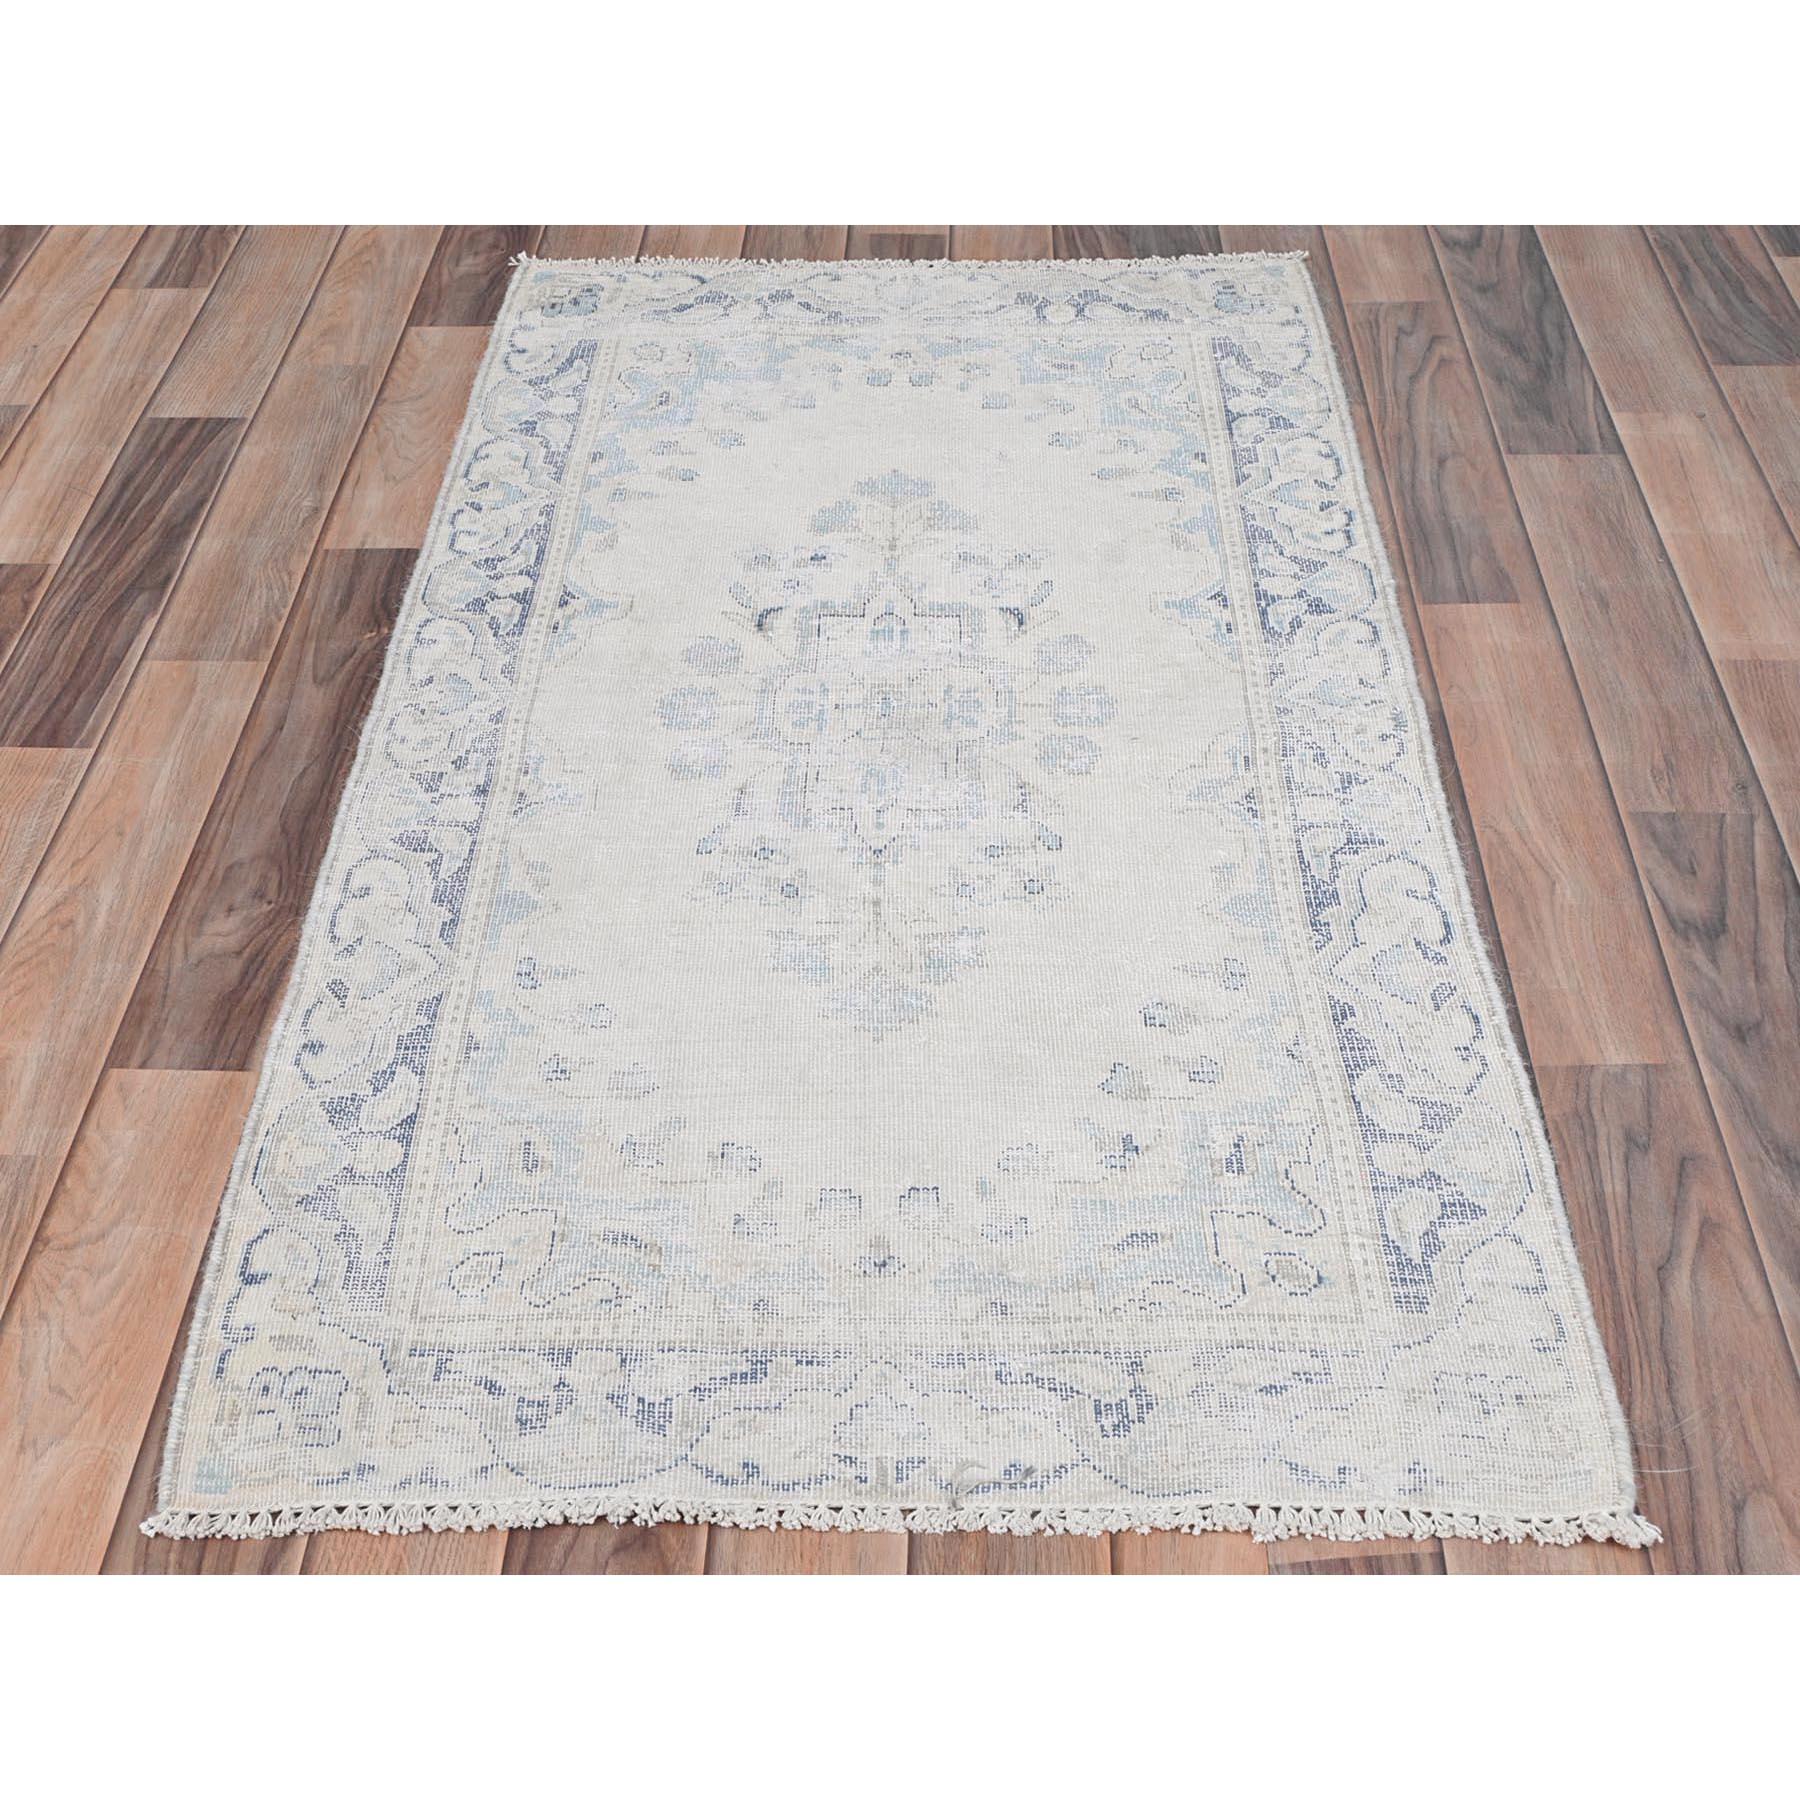 This fabulous Hand-Knotted carpet has been created and designed for extra strength and durability. This rug has been handcrafted for weeks in the traditional method that is used to make
Exact Rug Size in Feet and Inches : 2'4